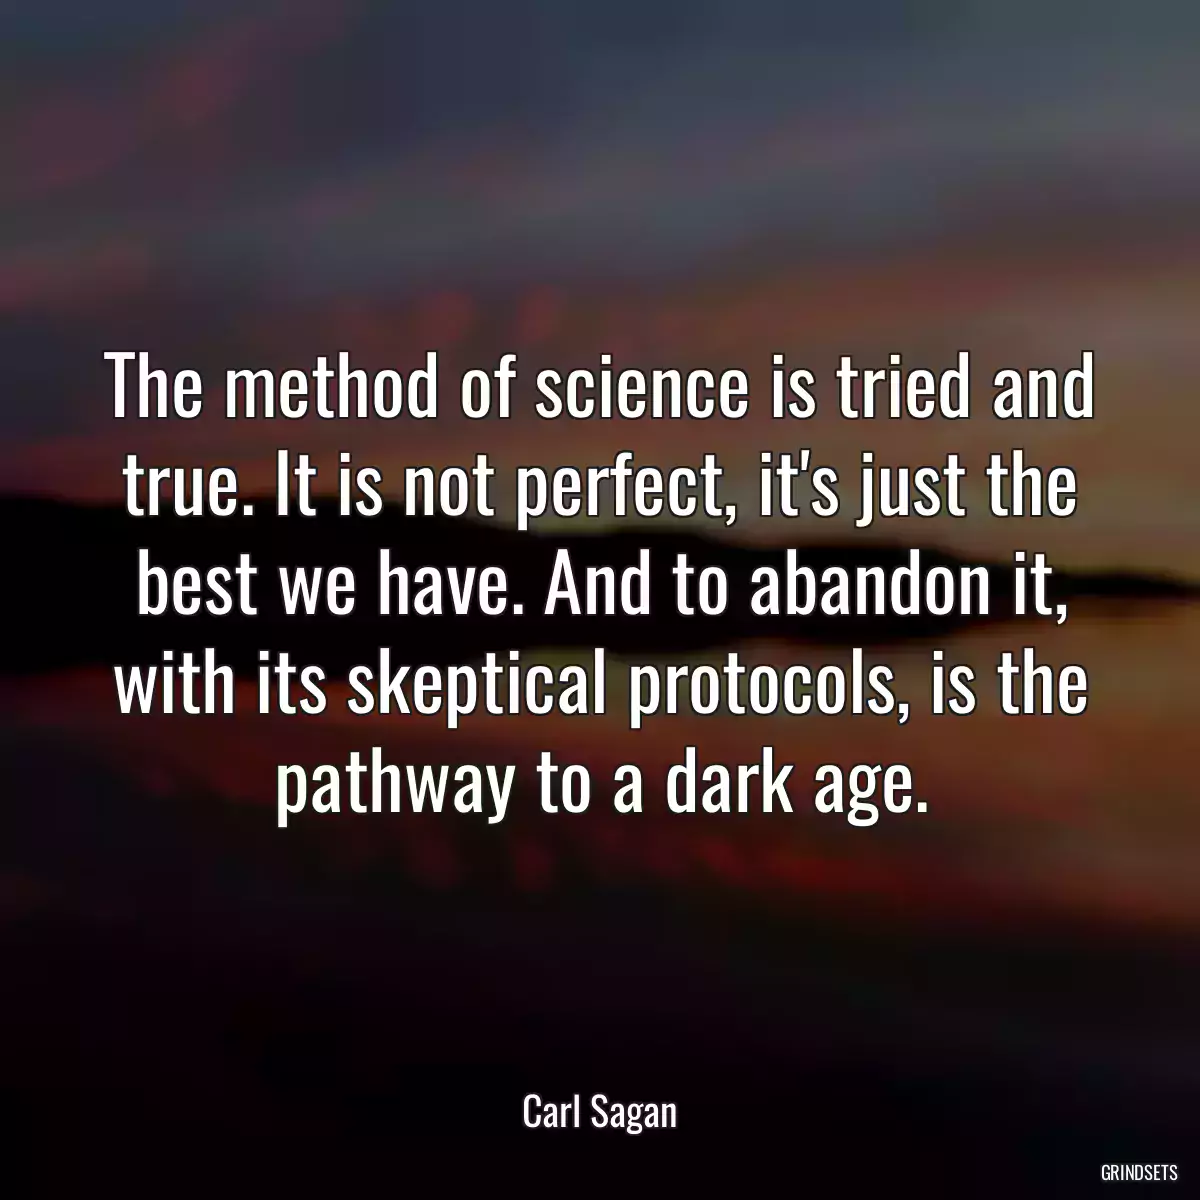 The method of science is tried and true. It is not perfect, it\'s just the best we have. And to abandon it, with its skeptical protocols, is the pathway to a dark age.